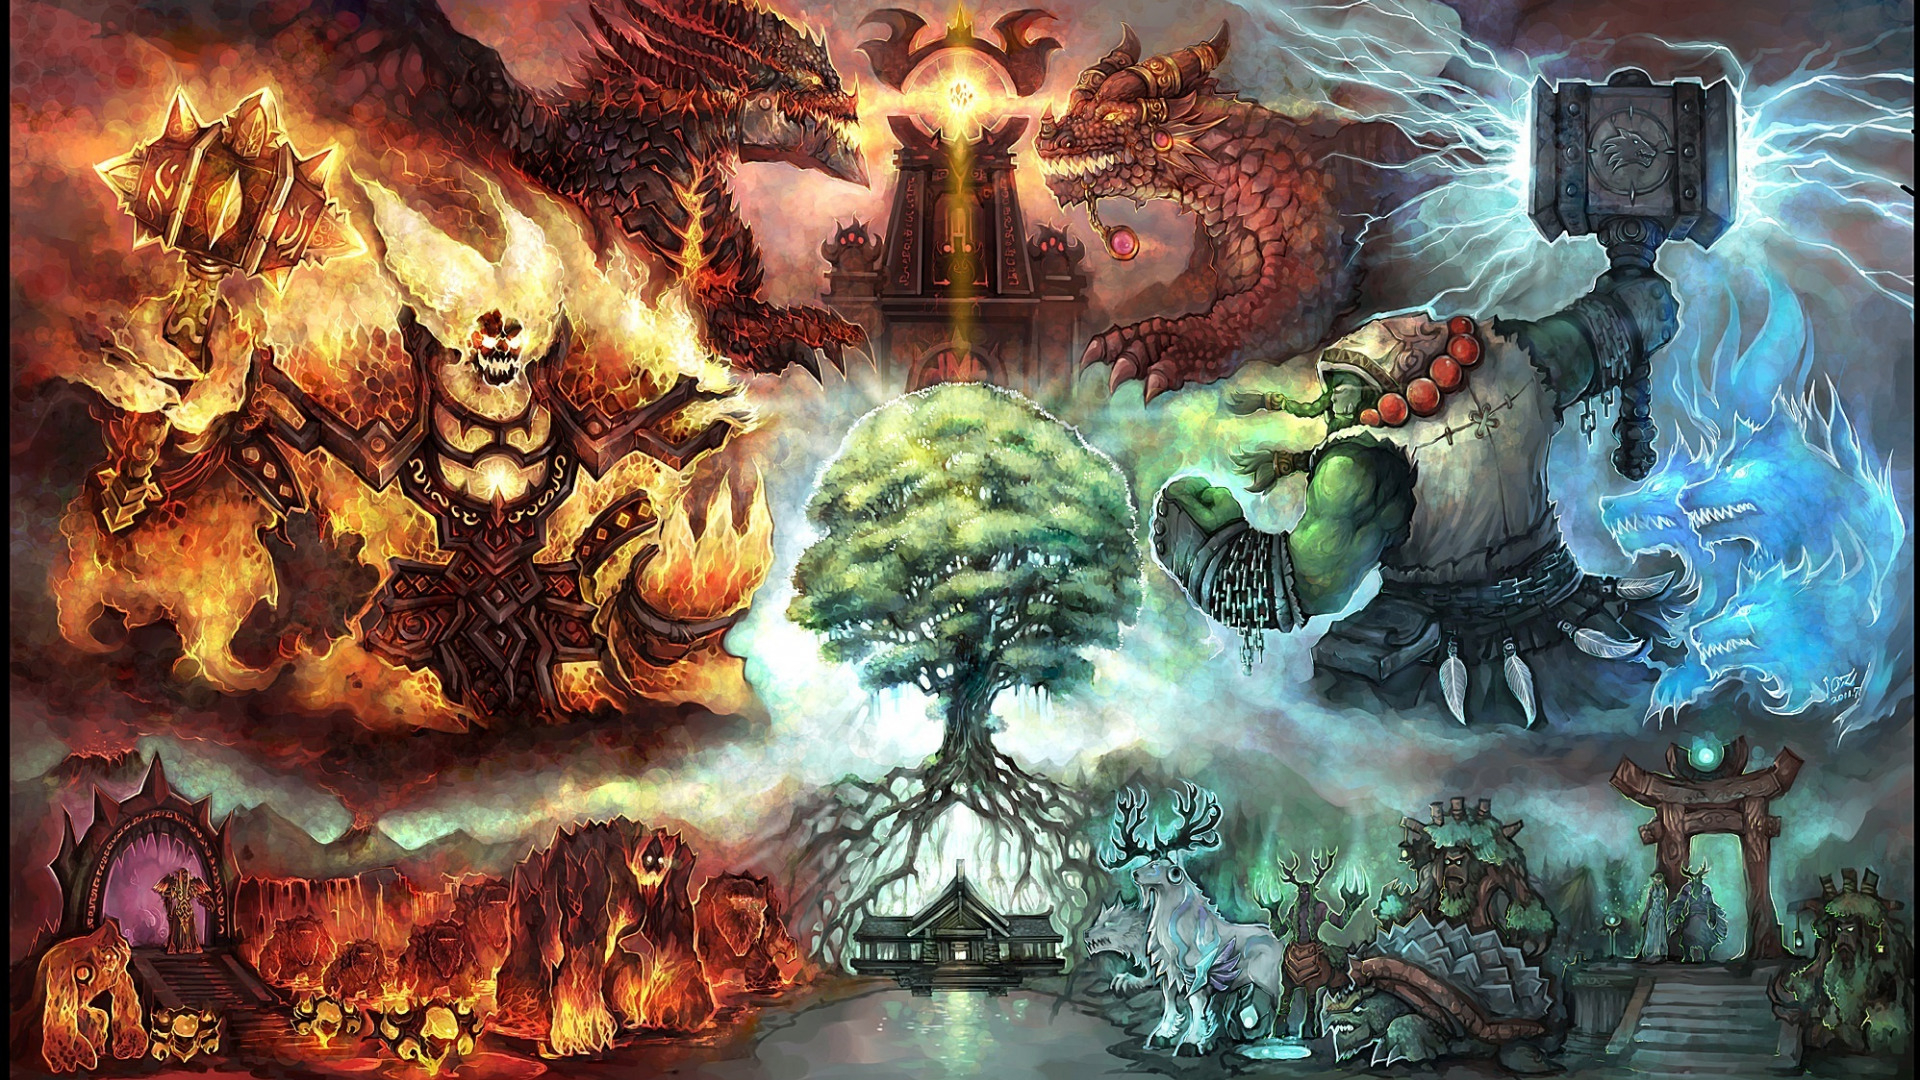 1920x1080 Download wallpaper the opposition, destruction, Orc, wow, cataclysm, Deathwing, Thrall, Thrall, deathwing and alexstraza, of Nordrassil, Thrall and ragnaros, the world tree, world of wacraft, the shaman of the world, Alexstrasza, secti